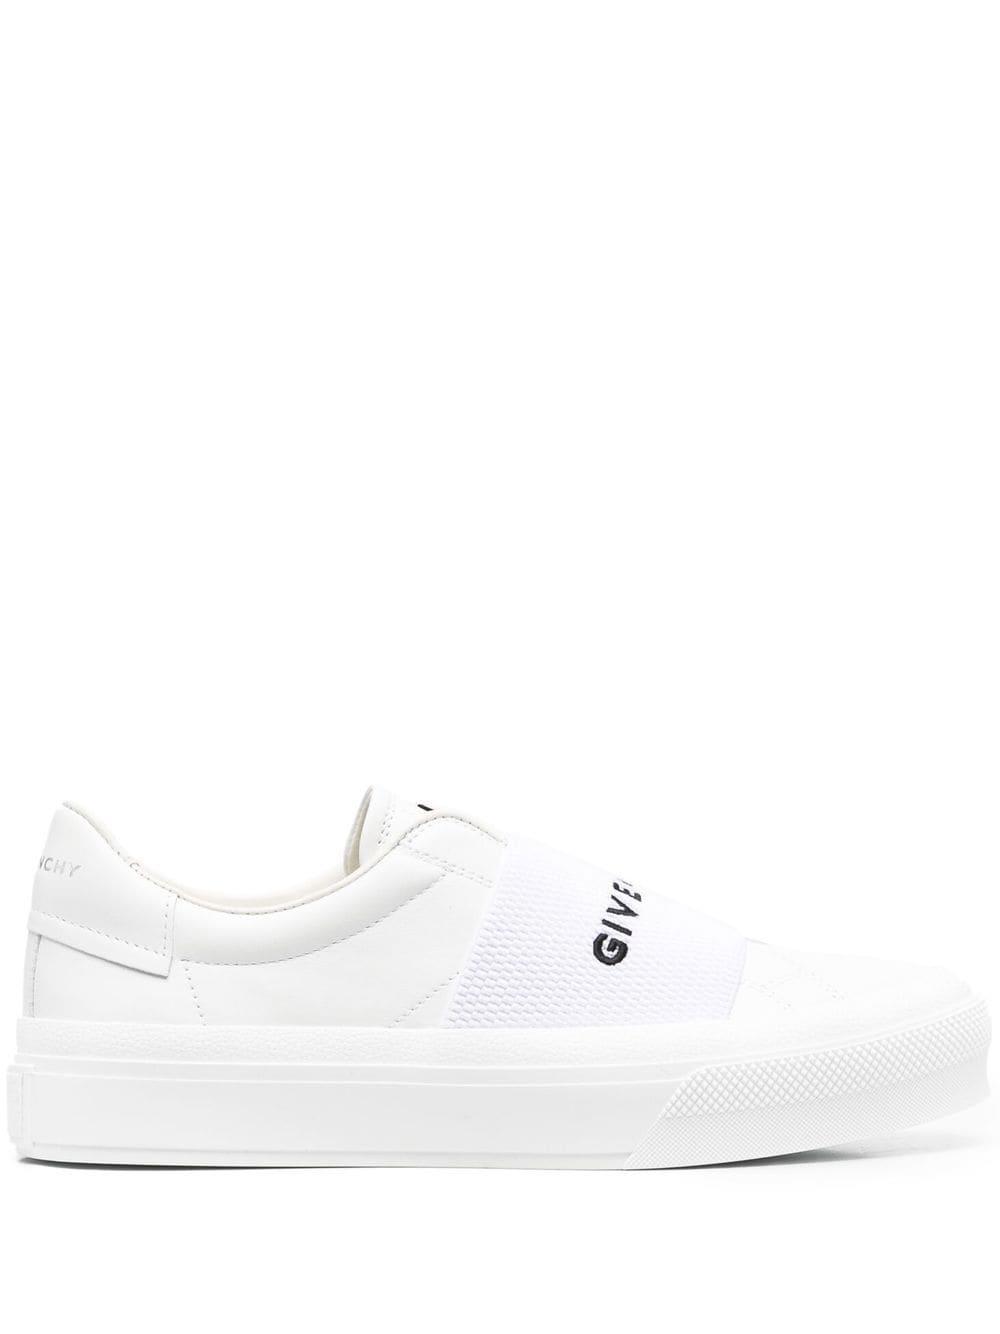 Givenchy Logo-strap Slip-on Sneakers in White - Save 8% | Lyst UK